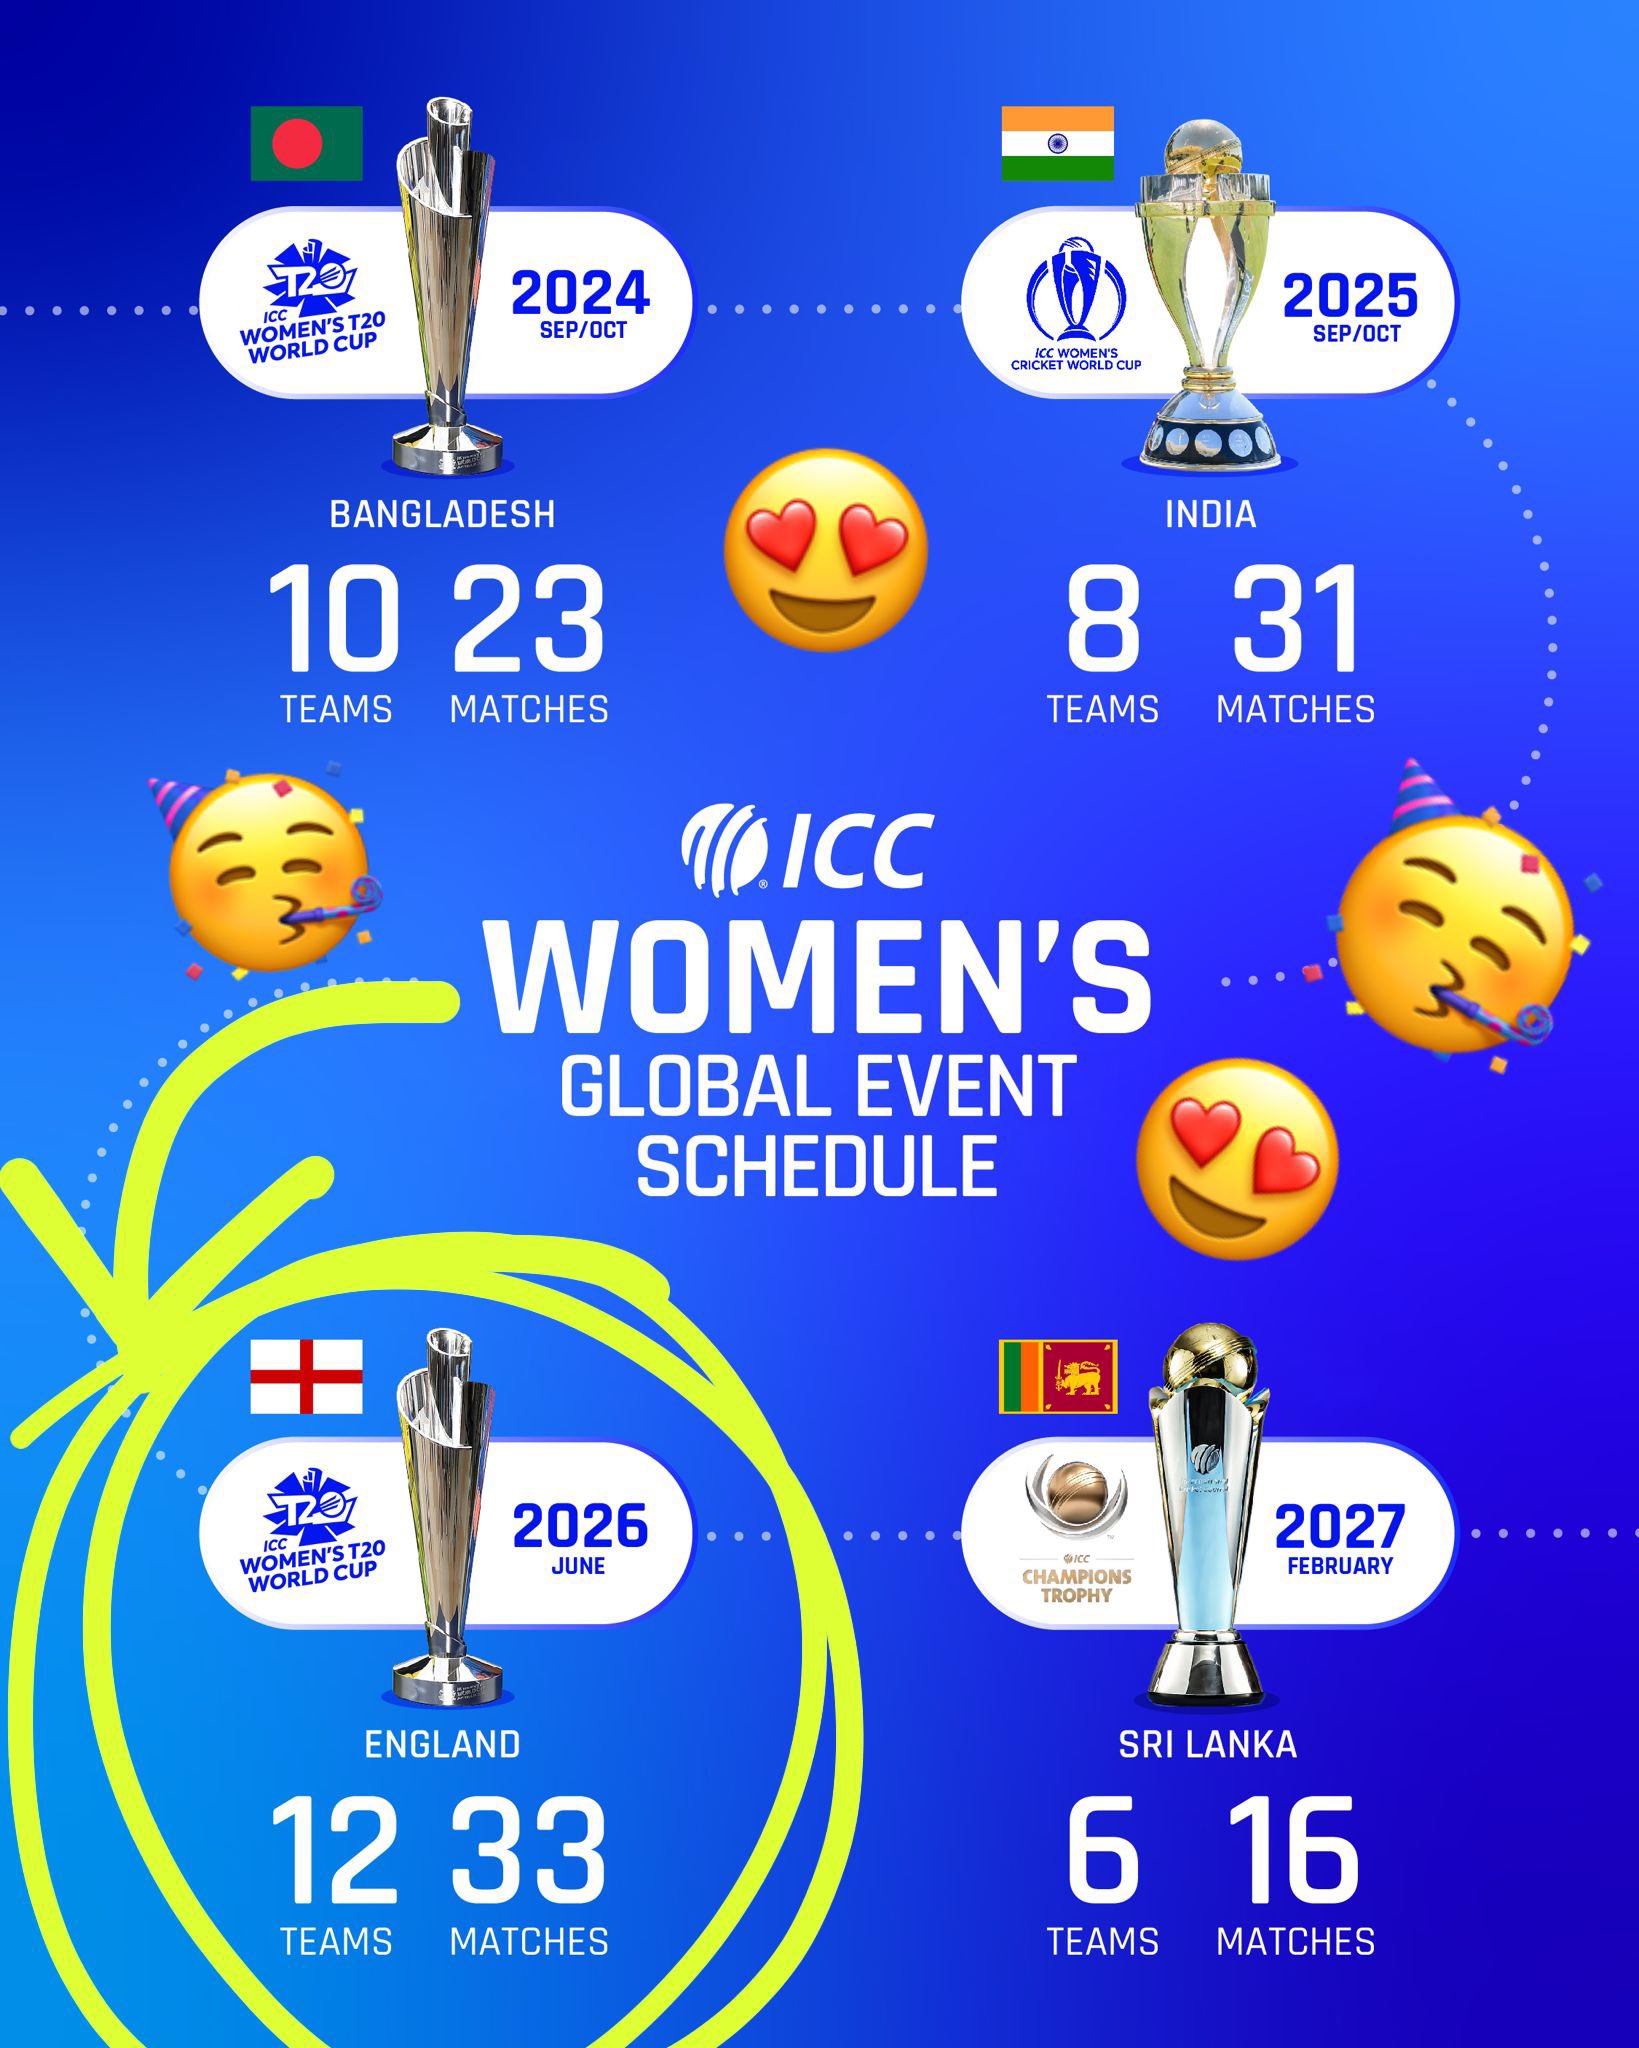 icc-annual-conference-india-to-host-women-s-cricket-world-cup-2025-follow-live-updates